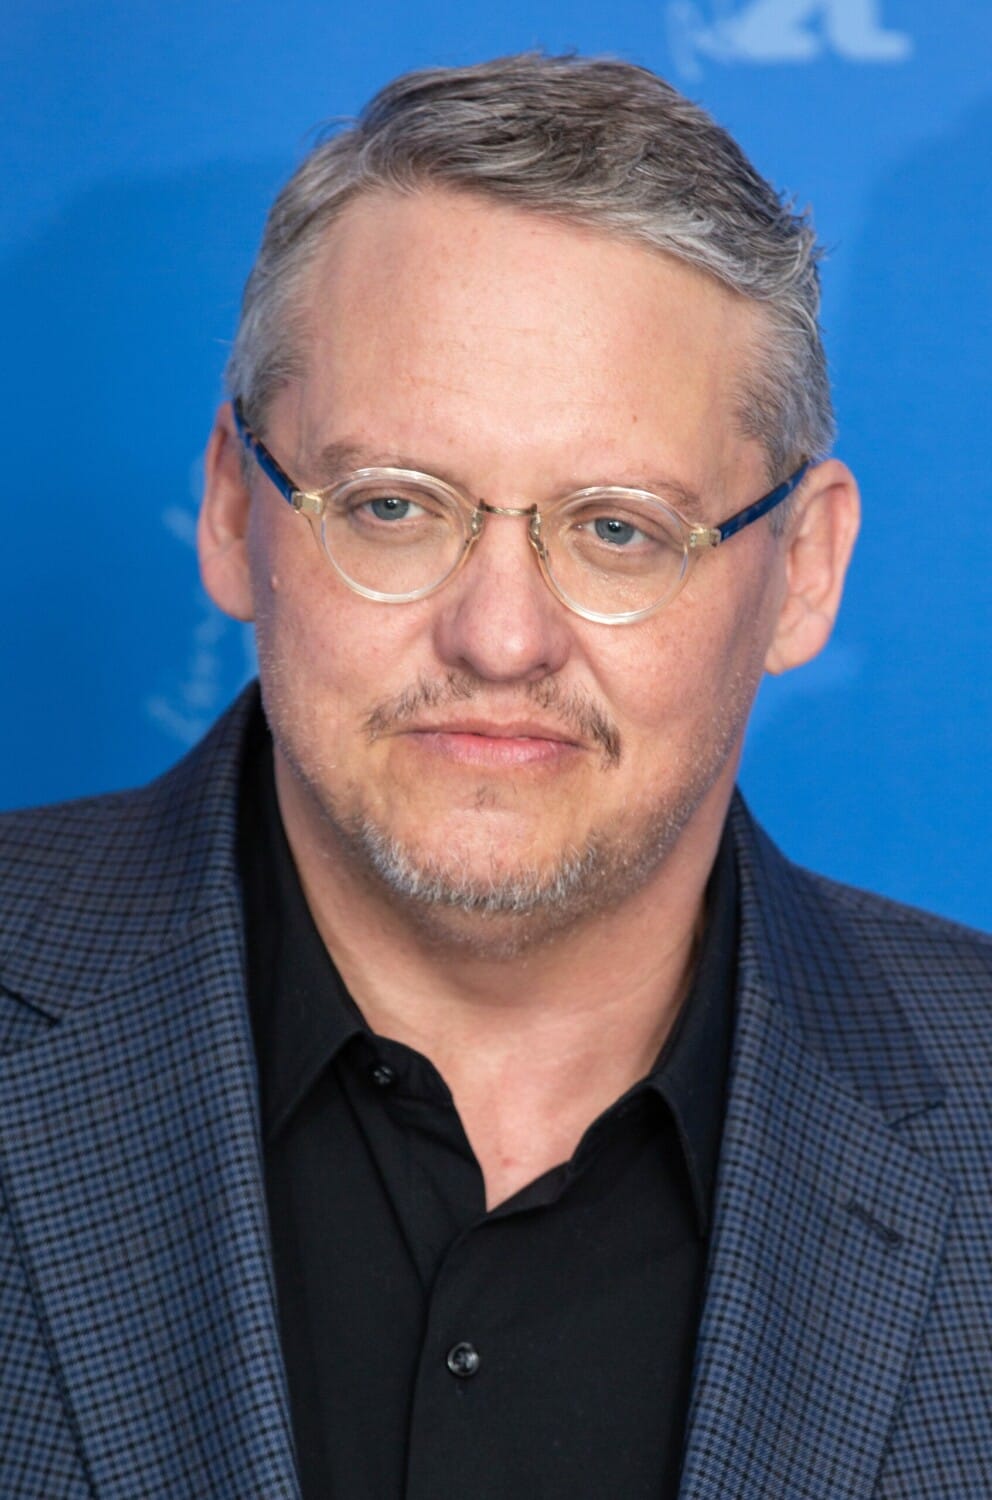 Adam McKay. By Harald Krichel - Own work, CC BY-SA 4.0, https://commons.wikimedia.org/w/index.php?curid=112403924